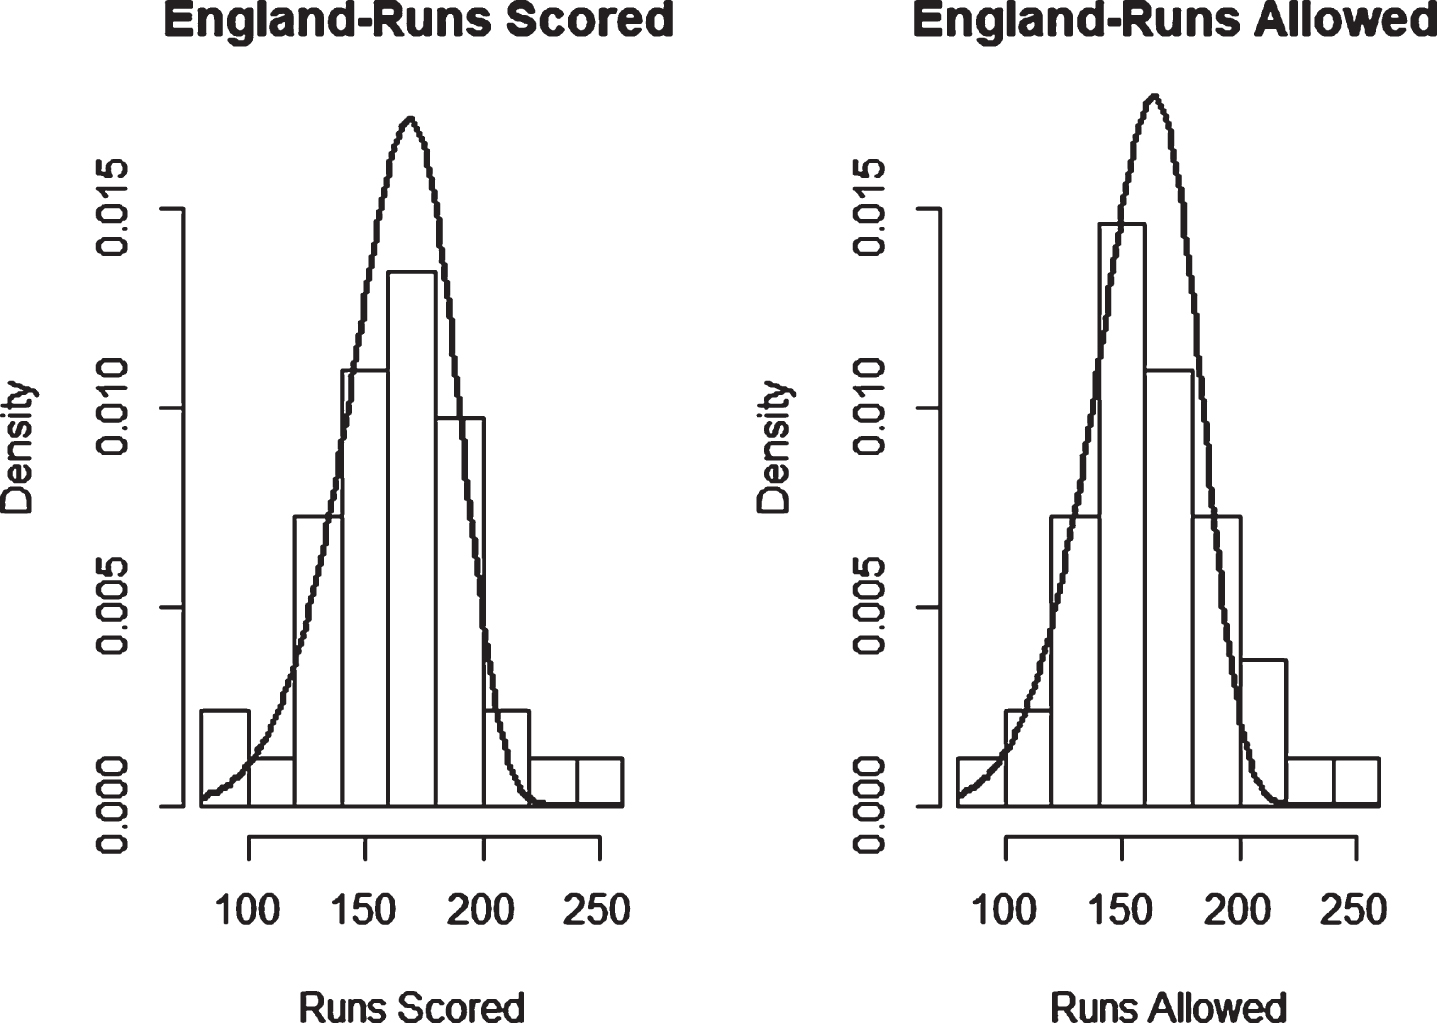 Weibull Distribution Fit for Runs Scored and Runs Allowed for England using Least Squares Method (Twenty20).